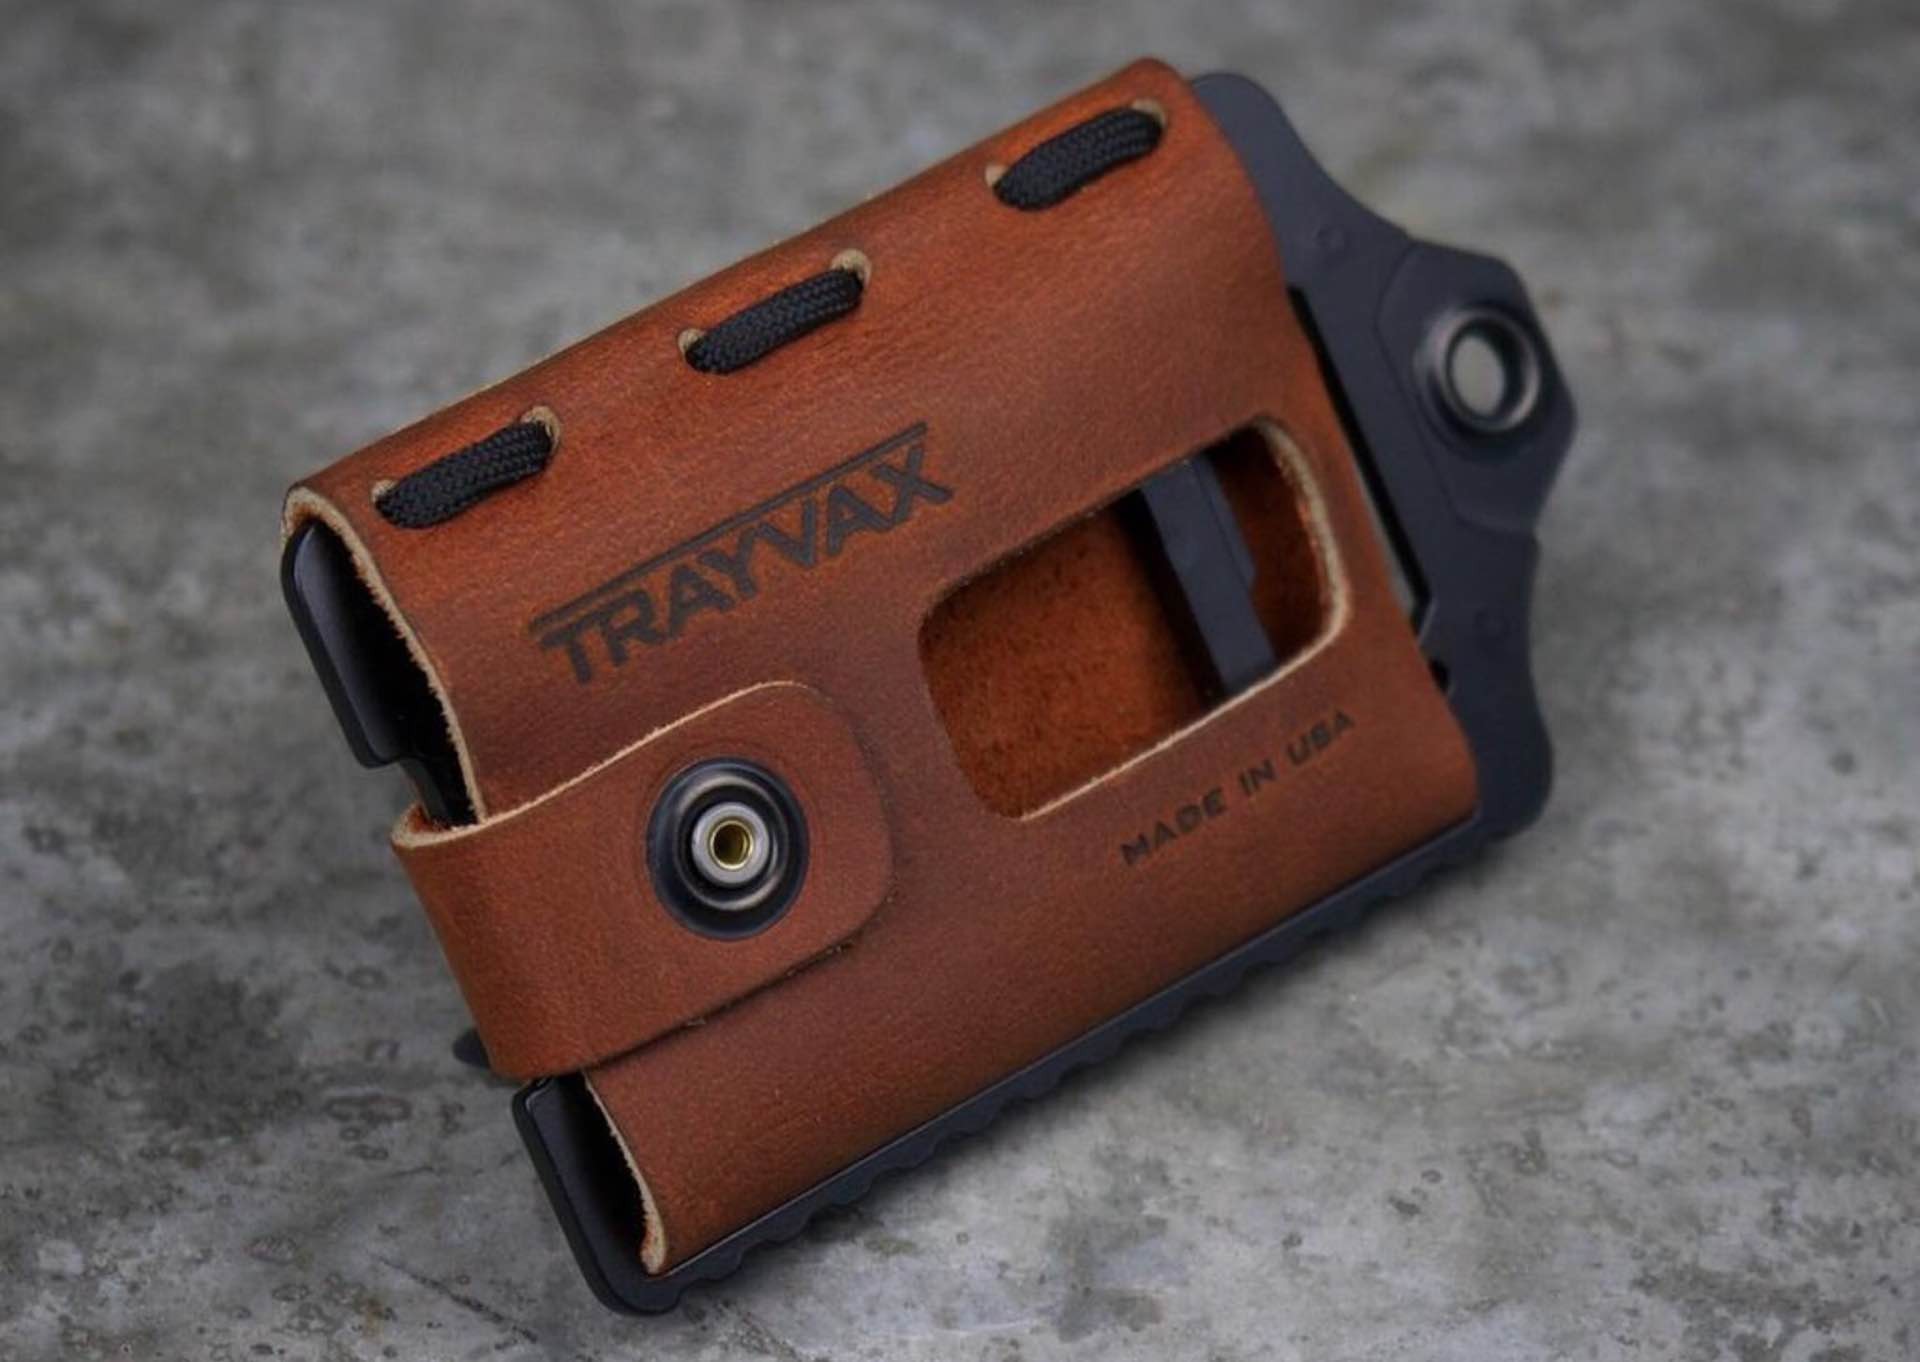 Trayvax's Element wallet/money clip. ($80–$85, depending on colorway)